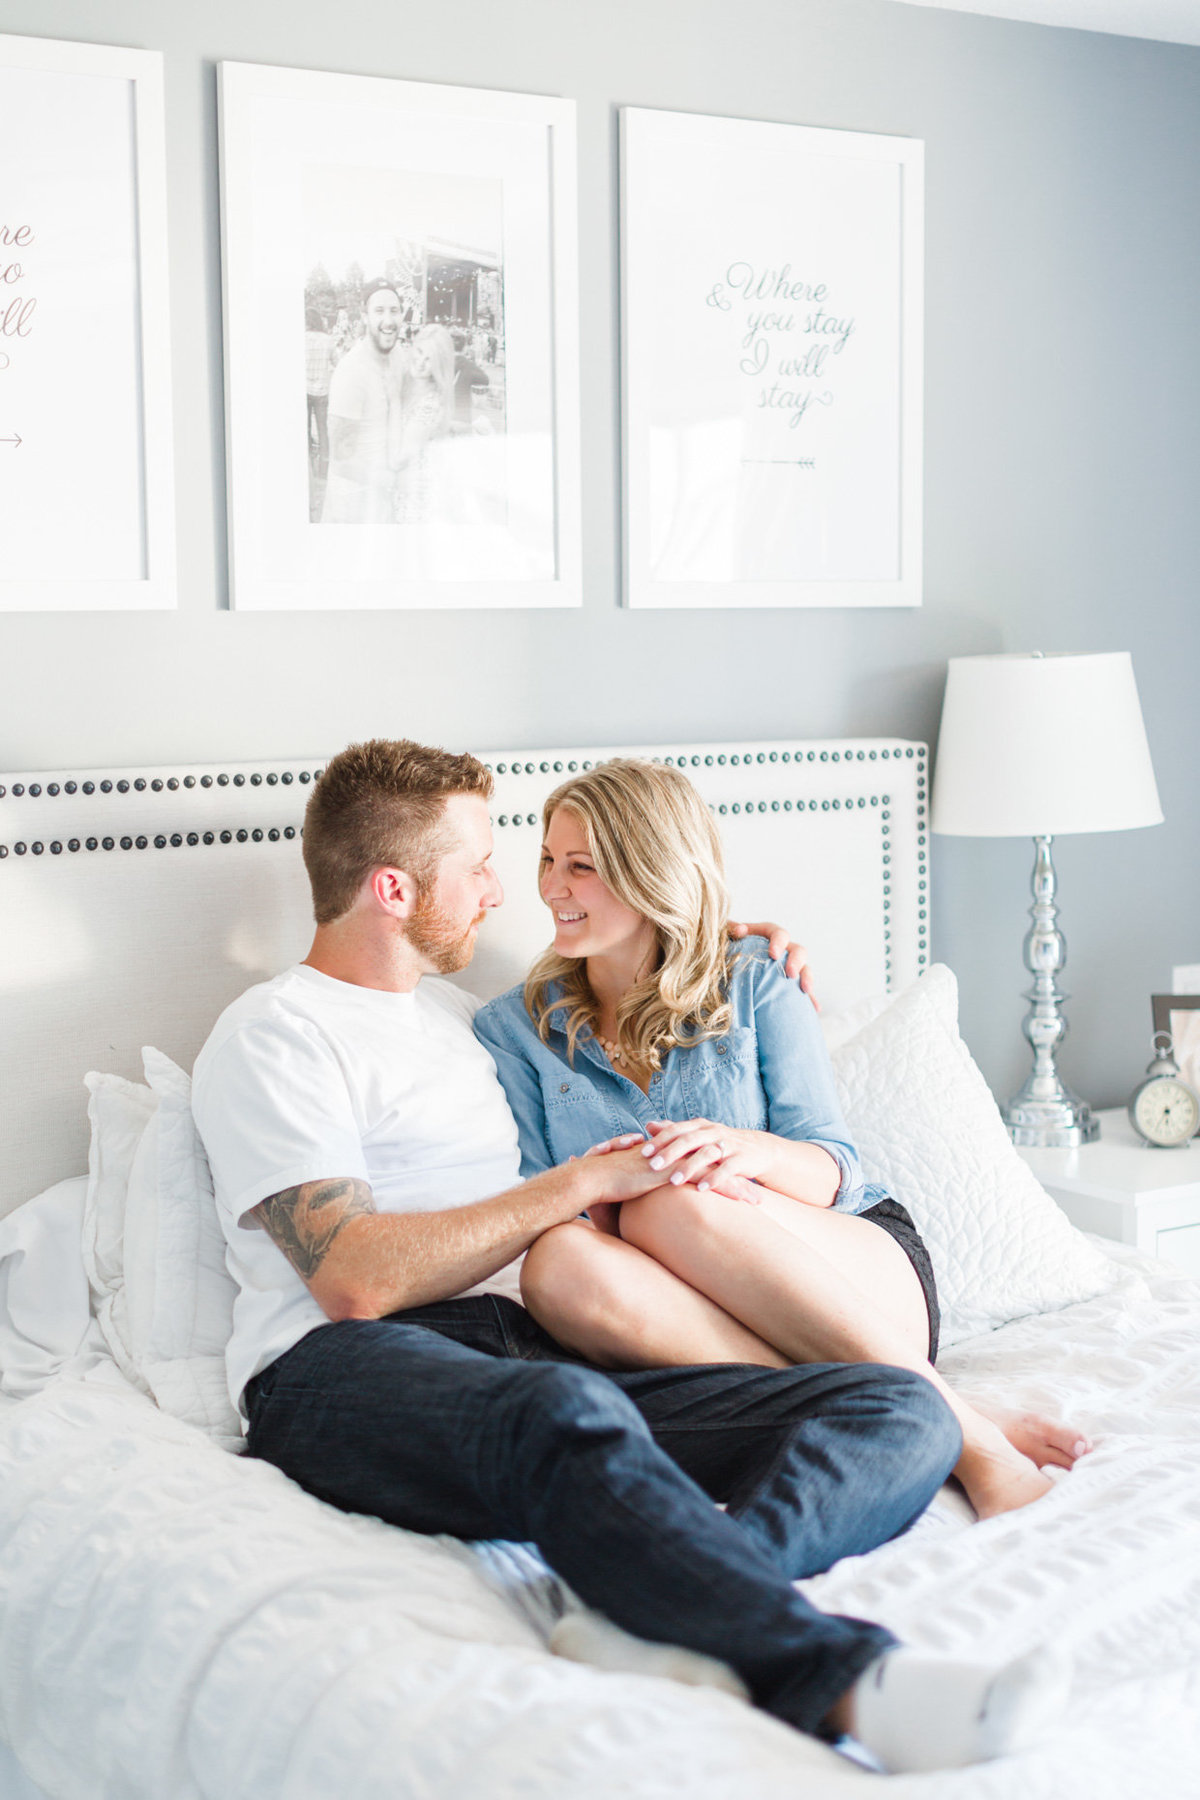 at-home-engagement-photos-vancouver-blush-sky-photography-13